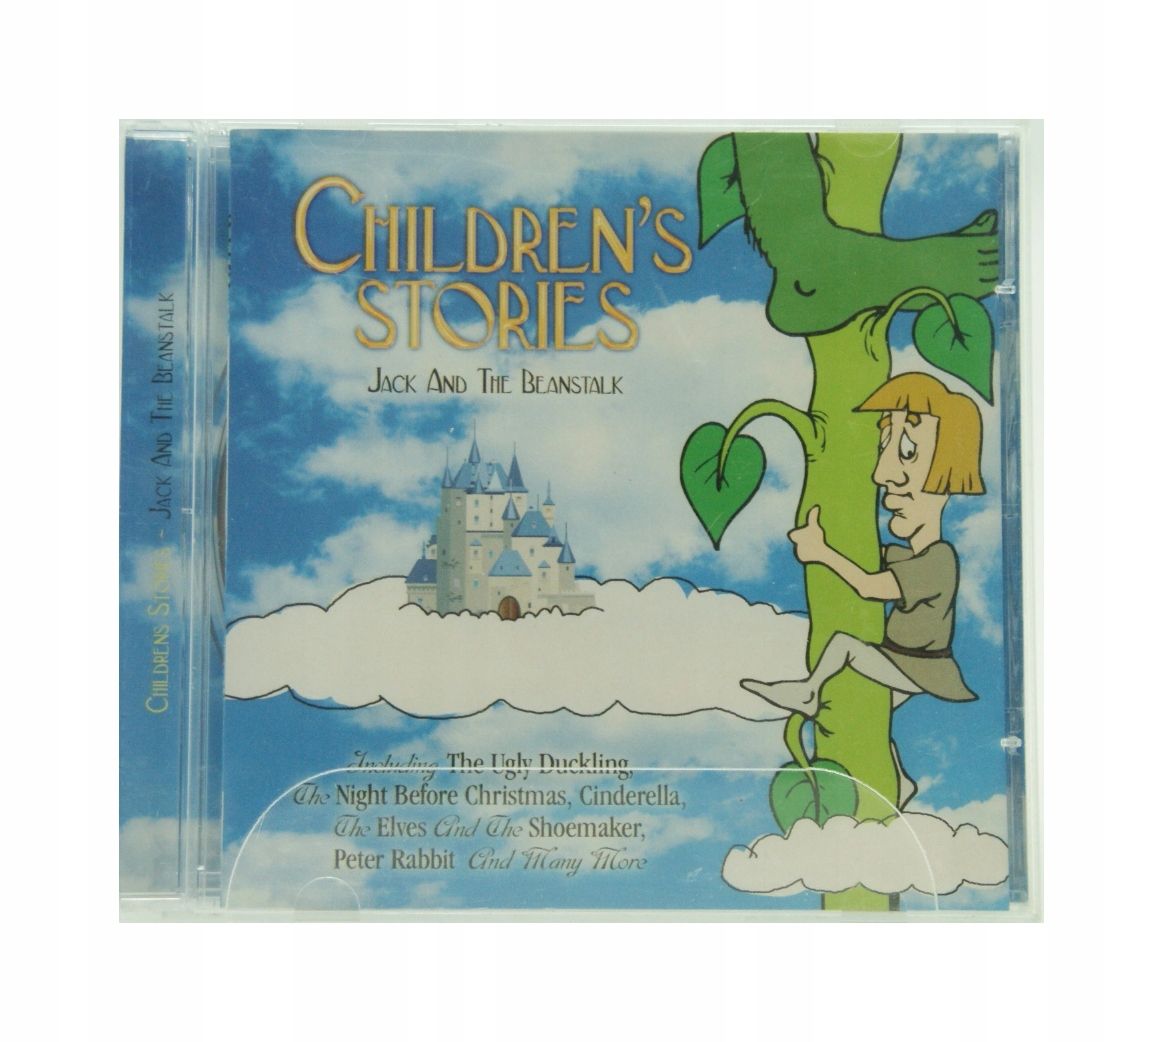 Cd - Children's Stories - Jack And The Beanstalk